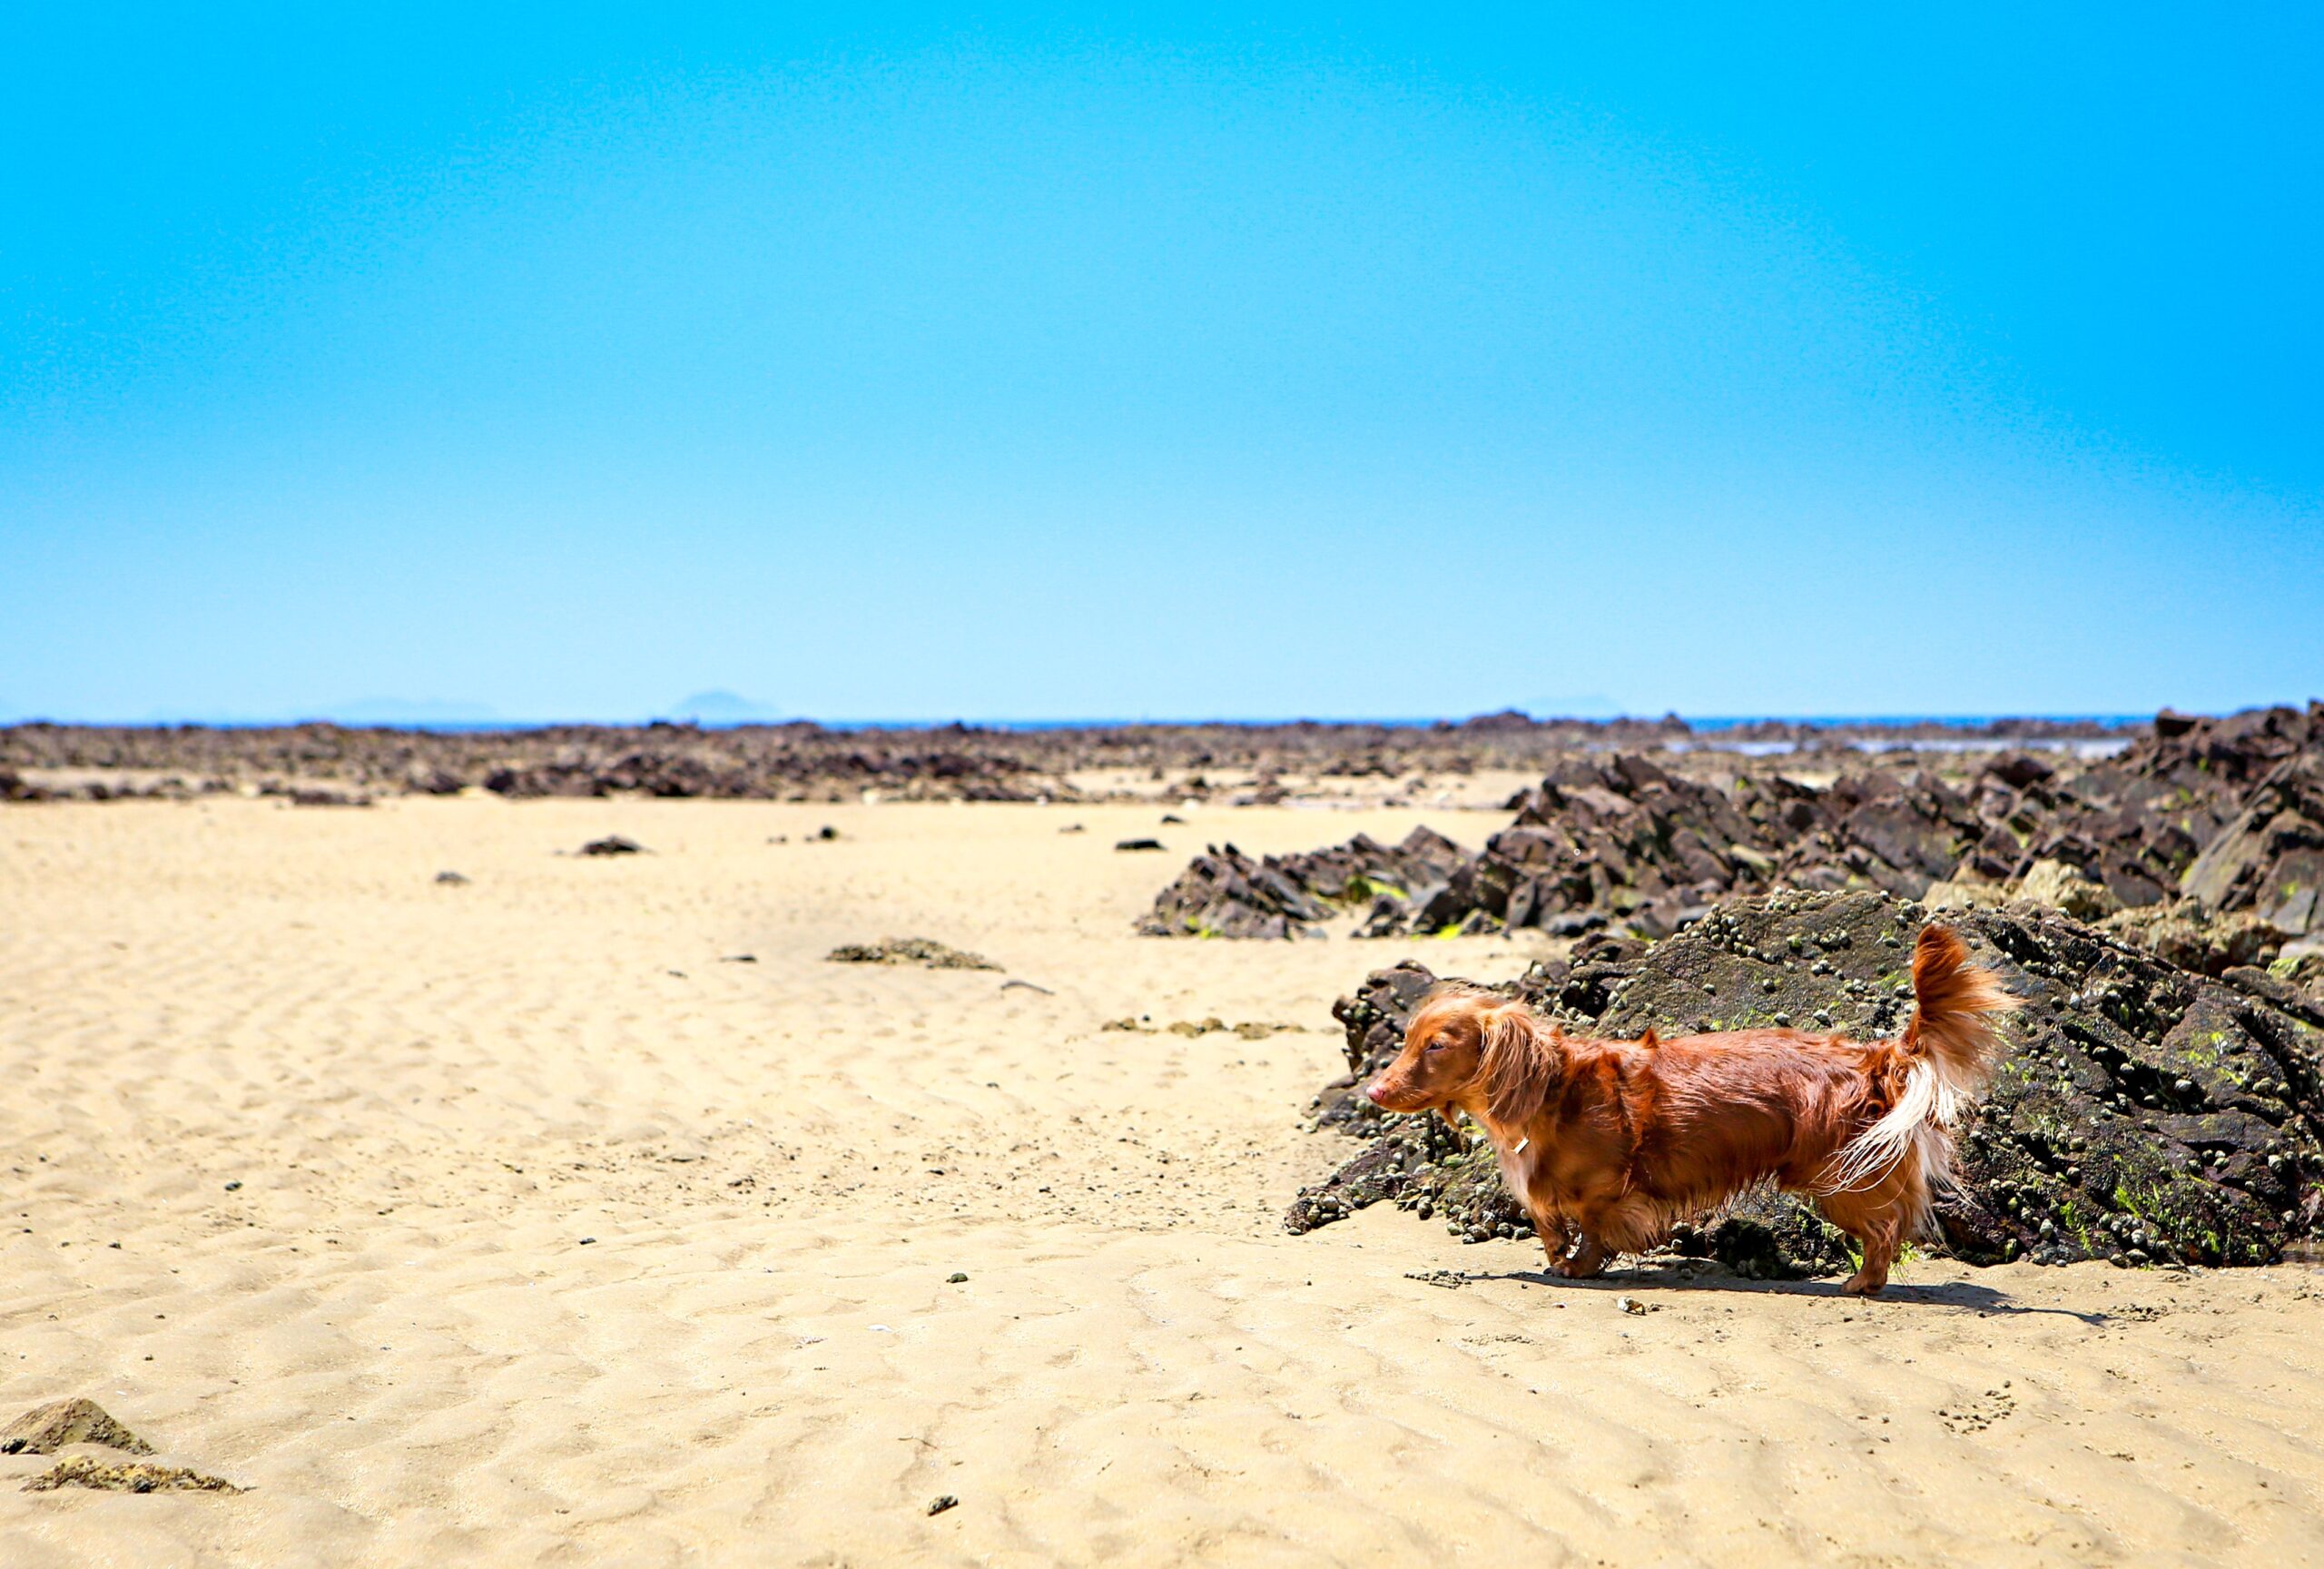 Top five tips to keep your Dachshund safe in hot weather.